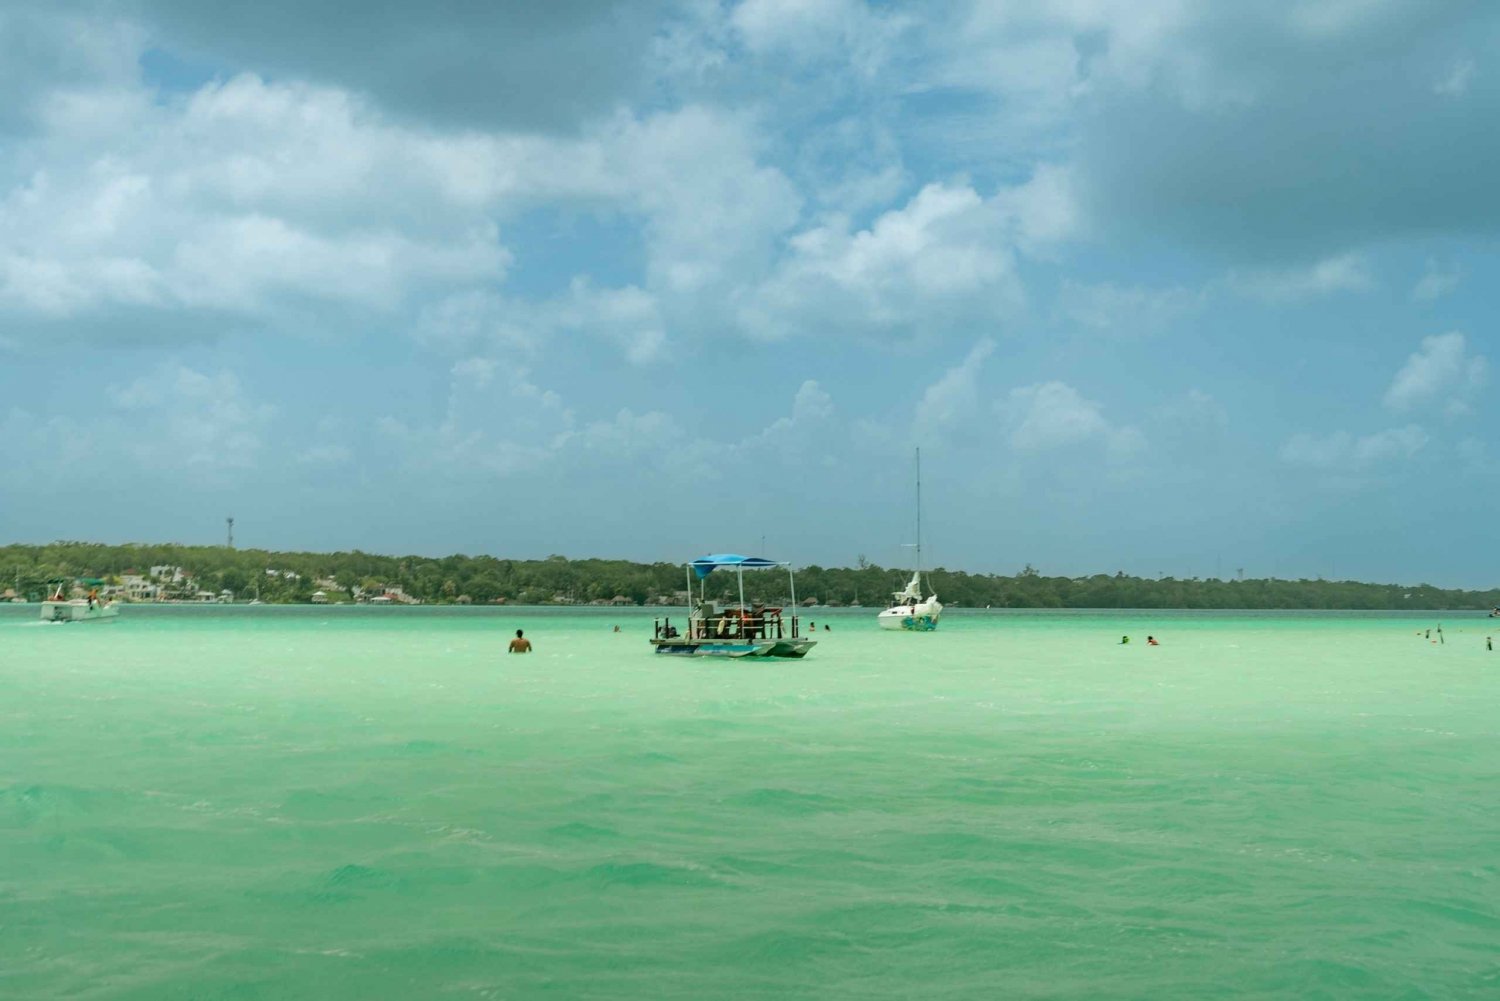 Bacalar: Seven Colors Lagoon Day Tour With Pickup & Drop-Off